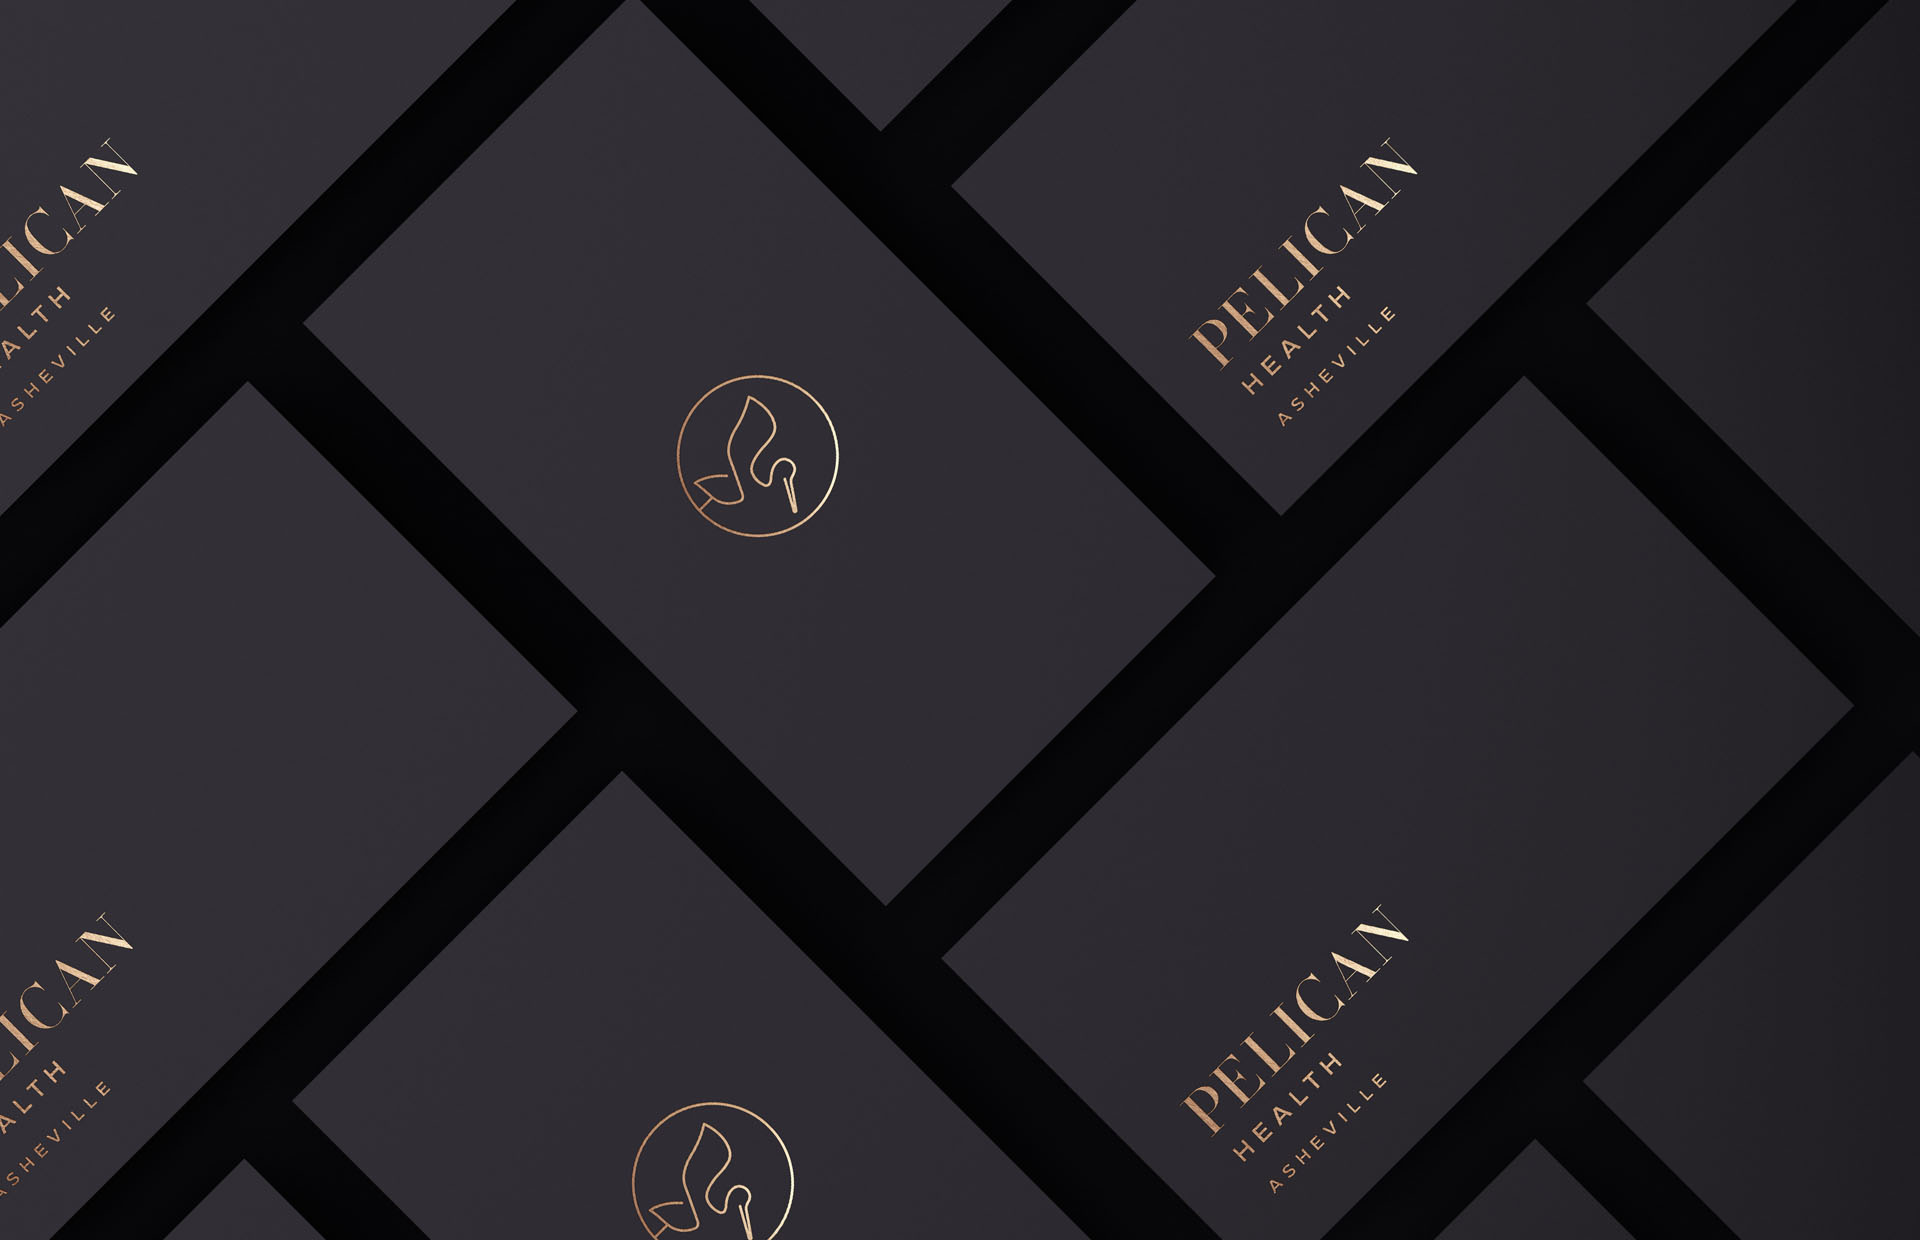 Pellican_01_FLAYLAY_BUSINESSCARDS